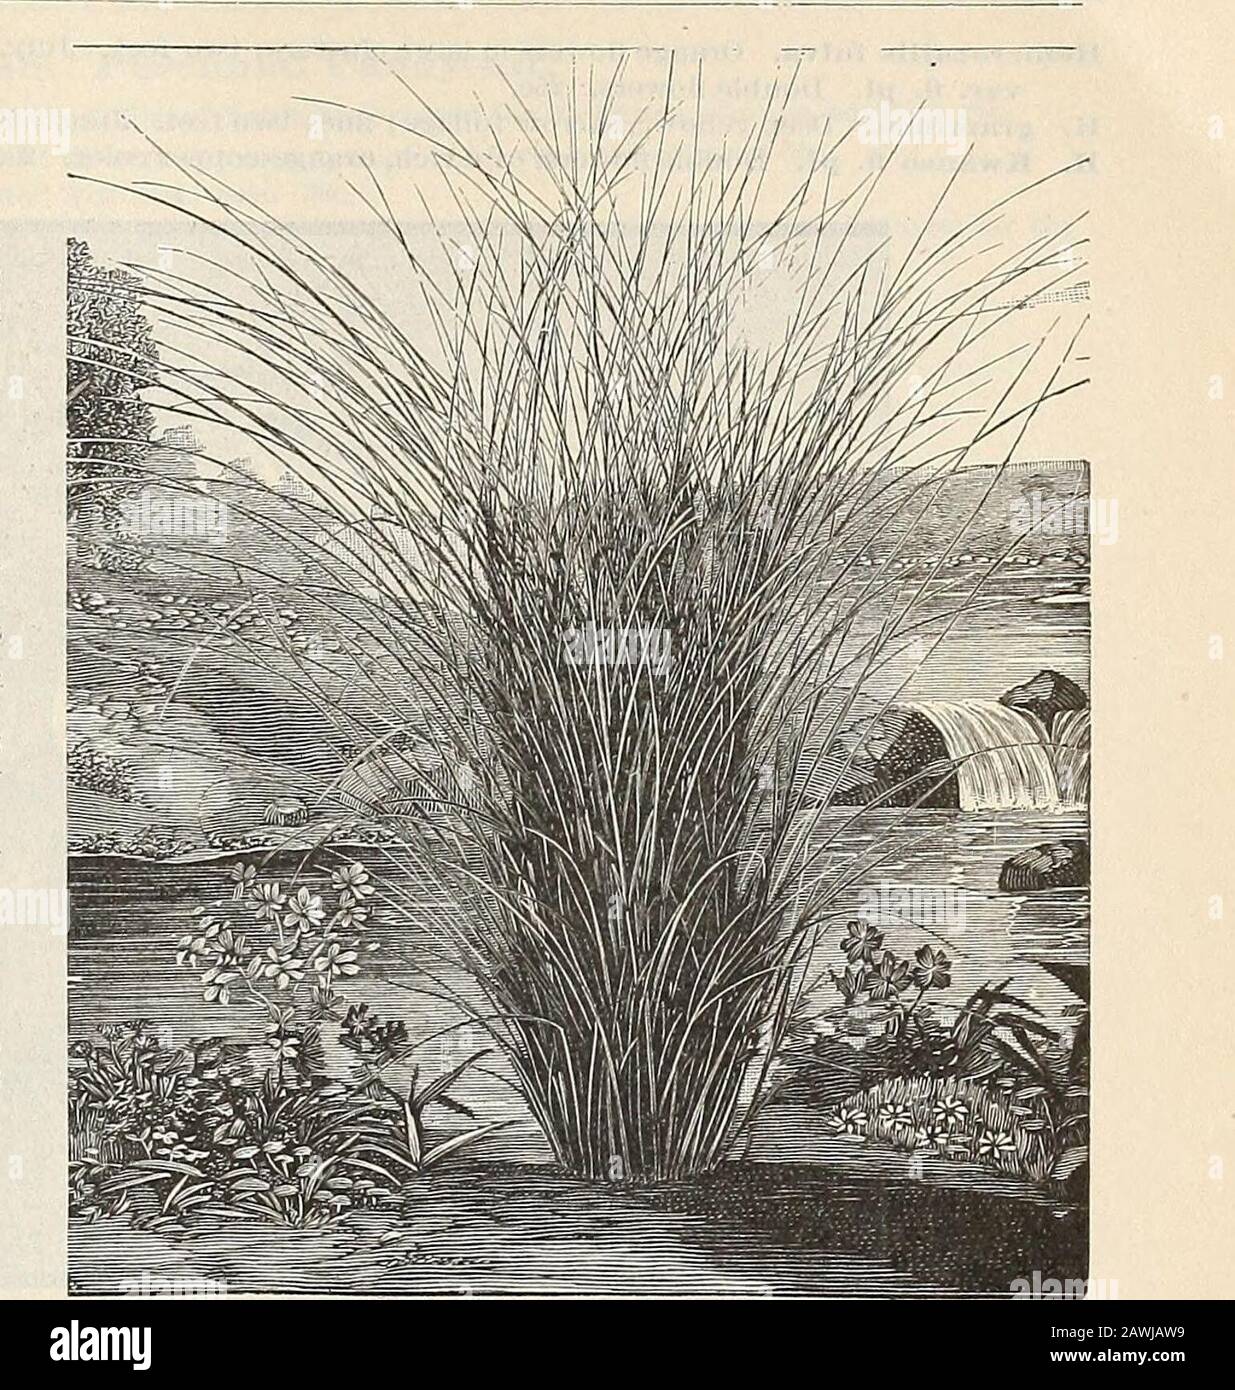 General catalogue of fruit and ornamental trees, shrubs, roses, etc . ember. 50c. H. orgyalis. GRACEFUL Spnflower. Tall and graceful; flowers three to four inches in diameter, produced abundantly in September; six to eight feet. 25c.H. multiflorus fl. i&gt;l. DOUBLE Sunflower. A blaze of gold in late summer and early autumn, aud altogether one of the showiest of hardy perennials. 25c. HELLEBORUS. Cliristmas Rose. The following are all evergreens, and bloom in March or April.H. atrorubens. Flowers purplish red, in clusters. April. 50c.H. niger. Beautiful white flowers. 50c. H. olympicus. A hand Stock Photo